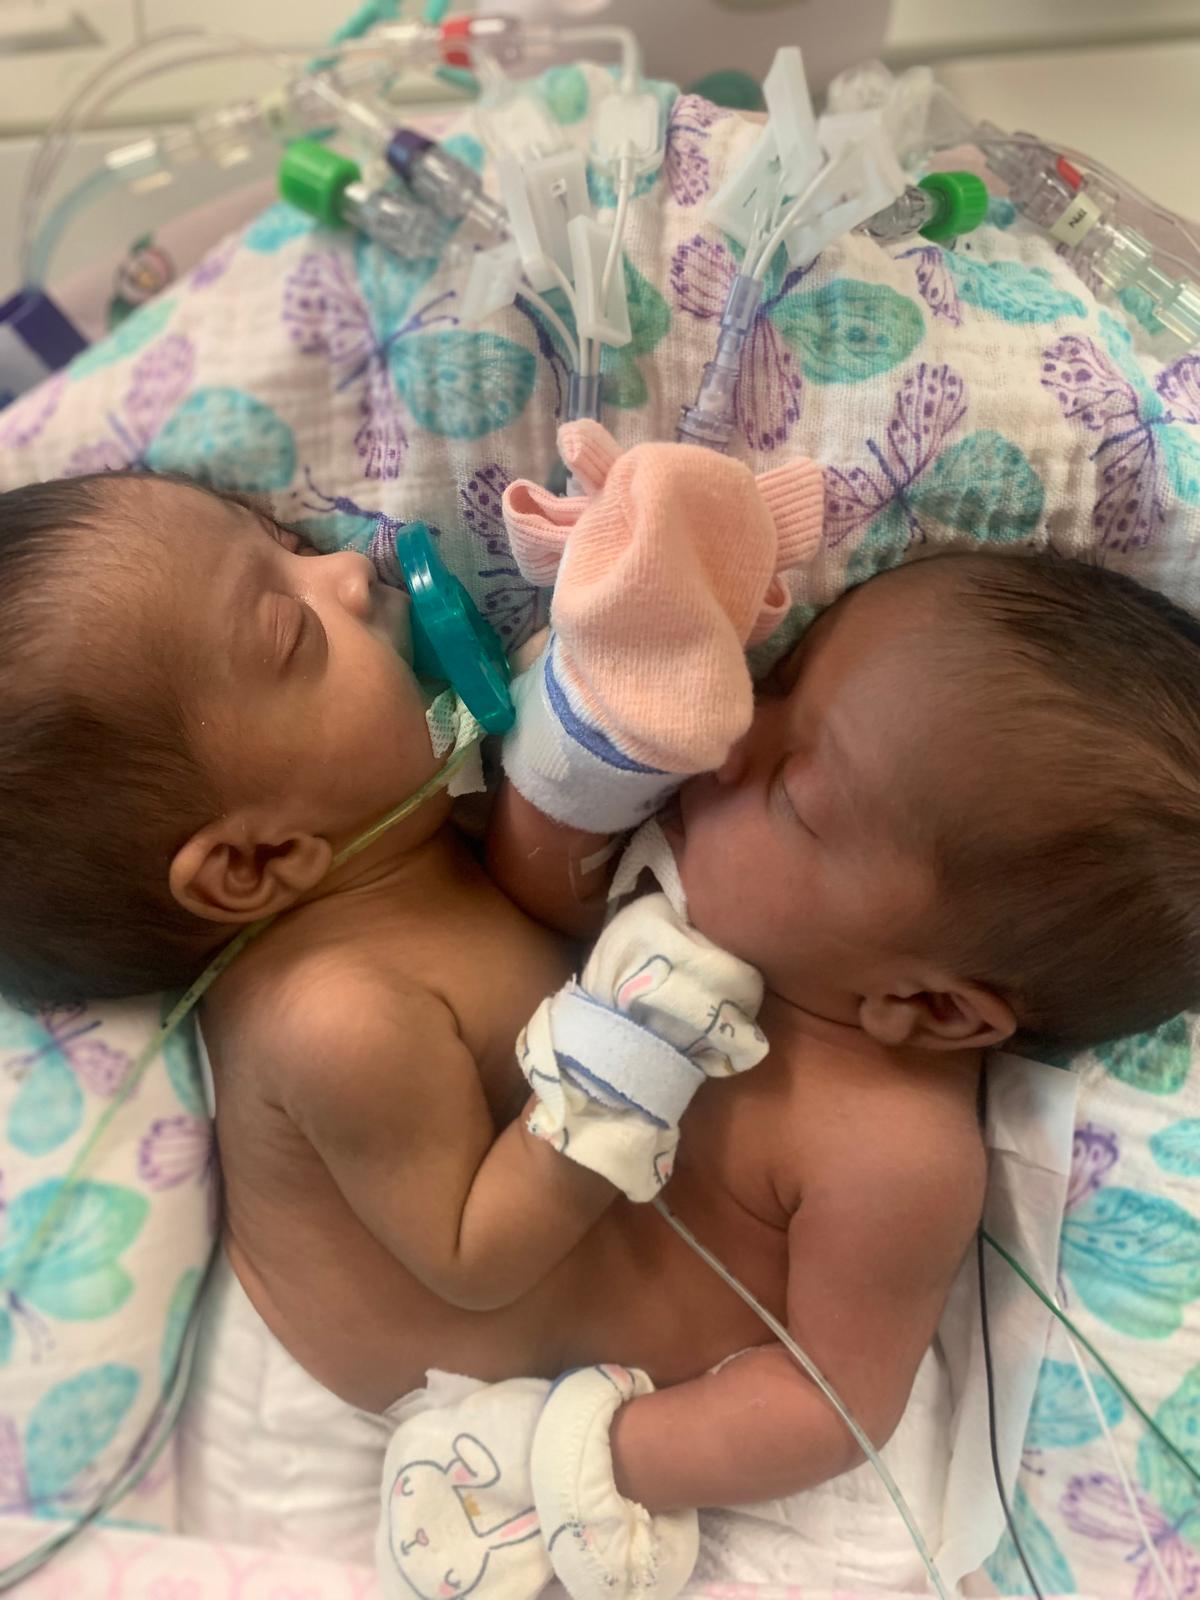 AmieLynn Rose and JamieLynn in the hospital, prior to being separated. (Courtesy of Cook Children's)